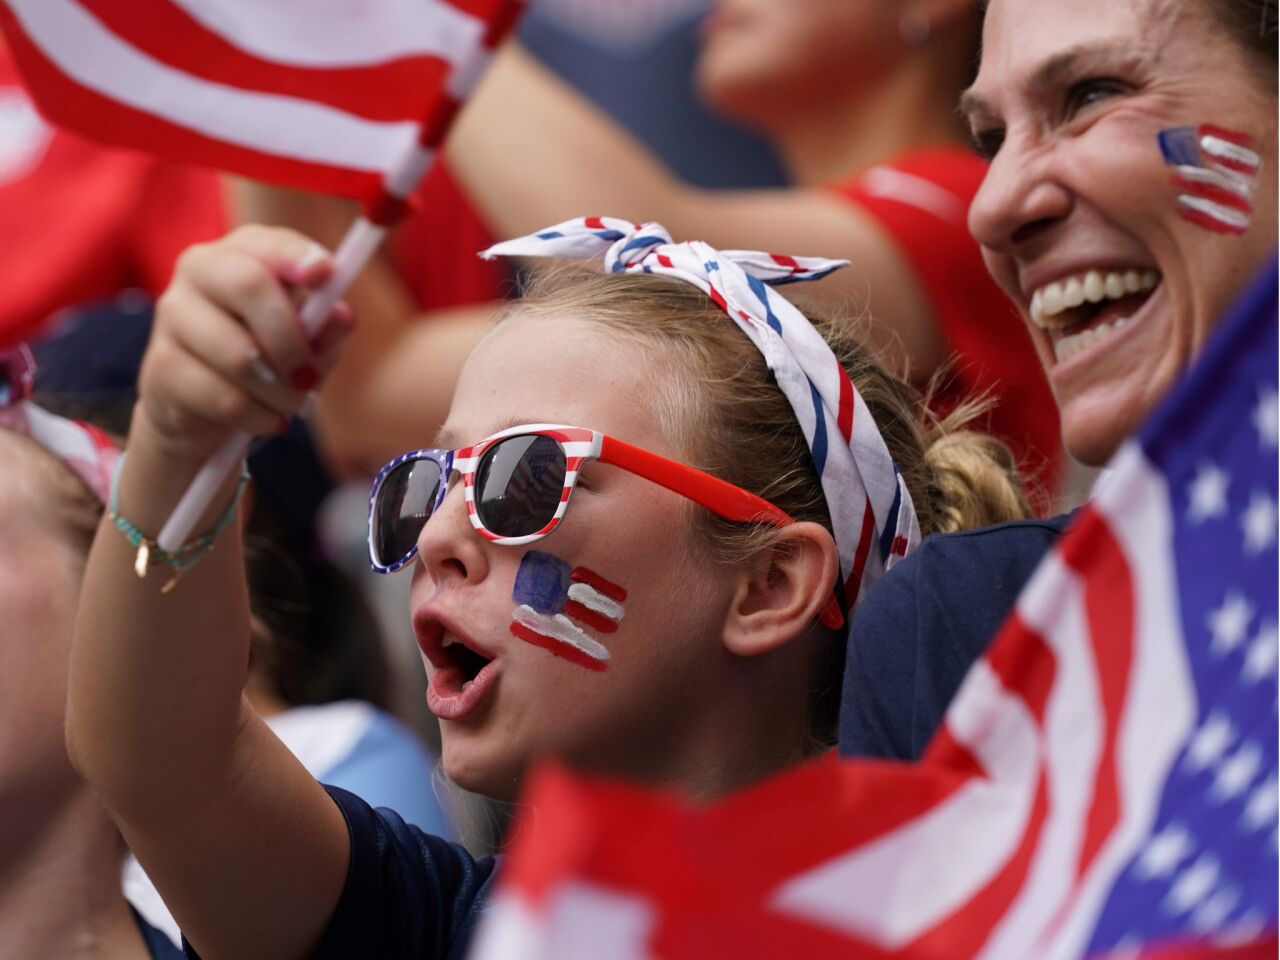 US supporters cheer their team during the France 2019 Women's World Cup round of sixteen between Spain and USA in Reims, France.